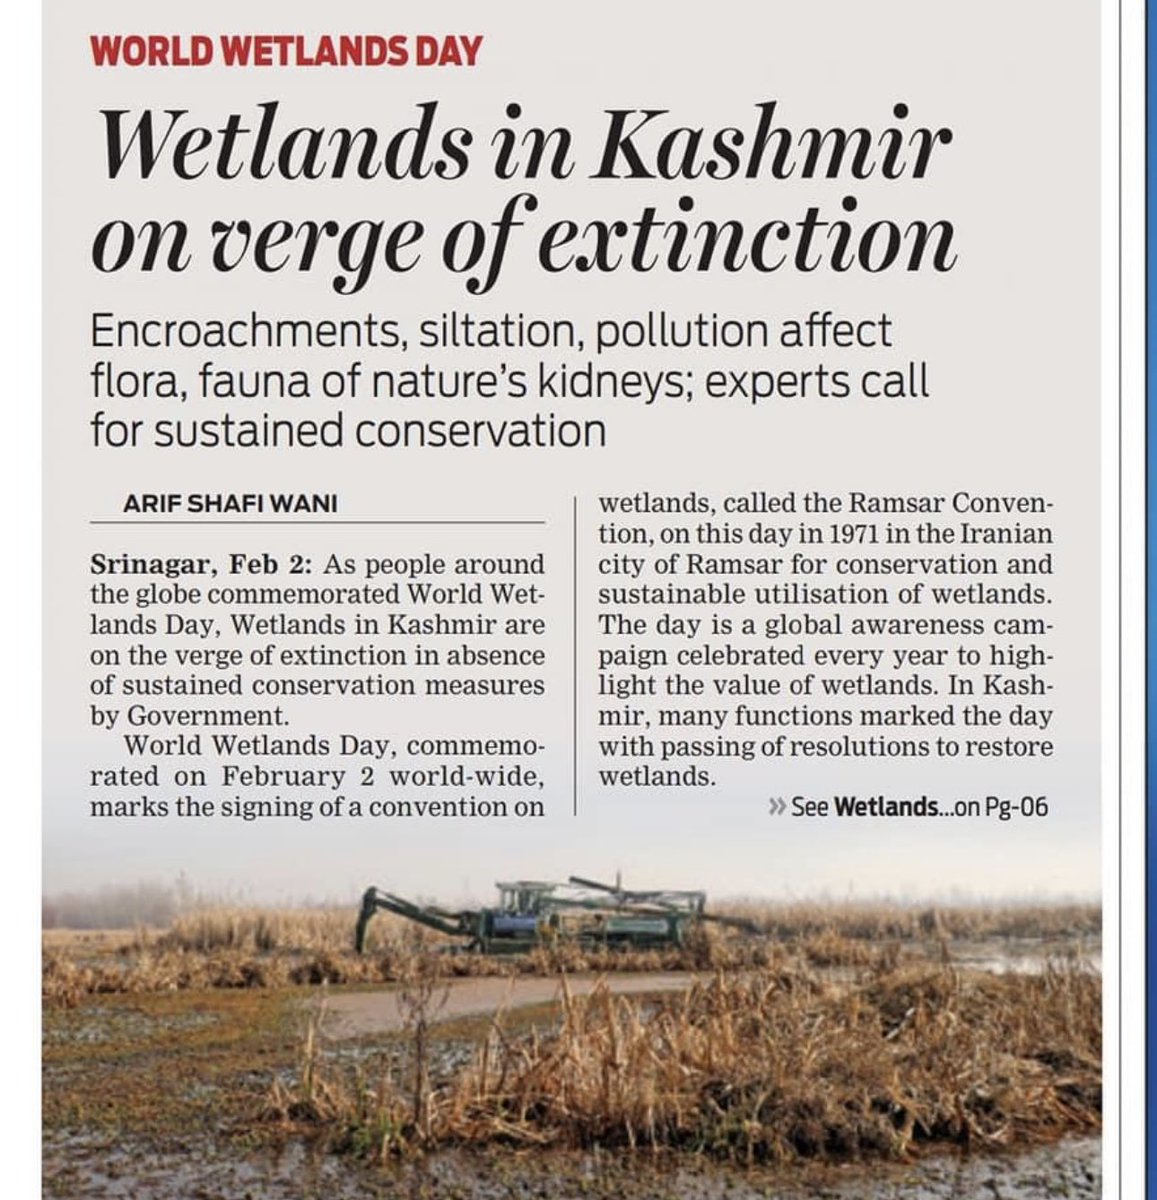 Comprehensive article on wetlands in GK! So much valuable information packed into one piece. Thank you @arifscribe for shedding light on this important topic 🌊 #WetlandsMatter